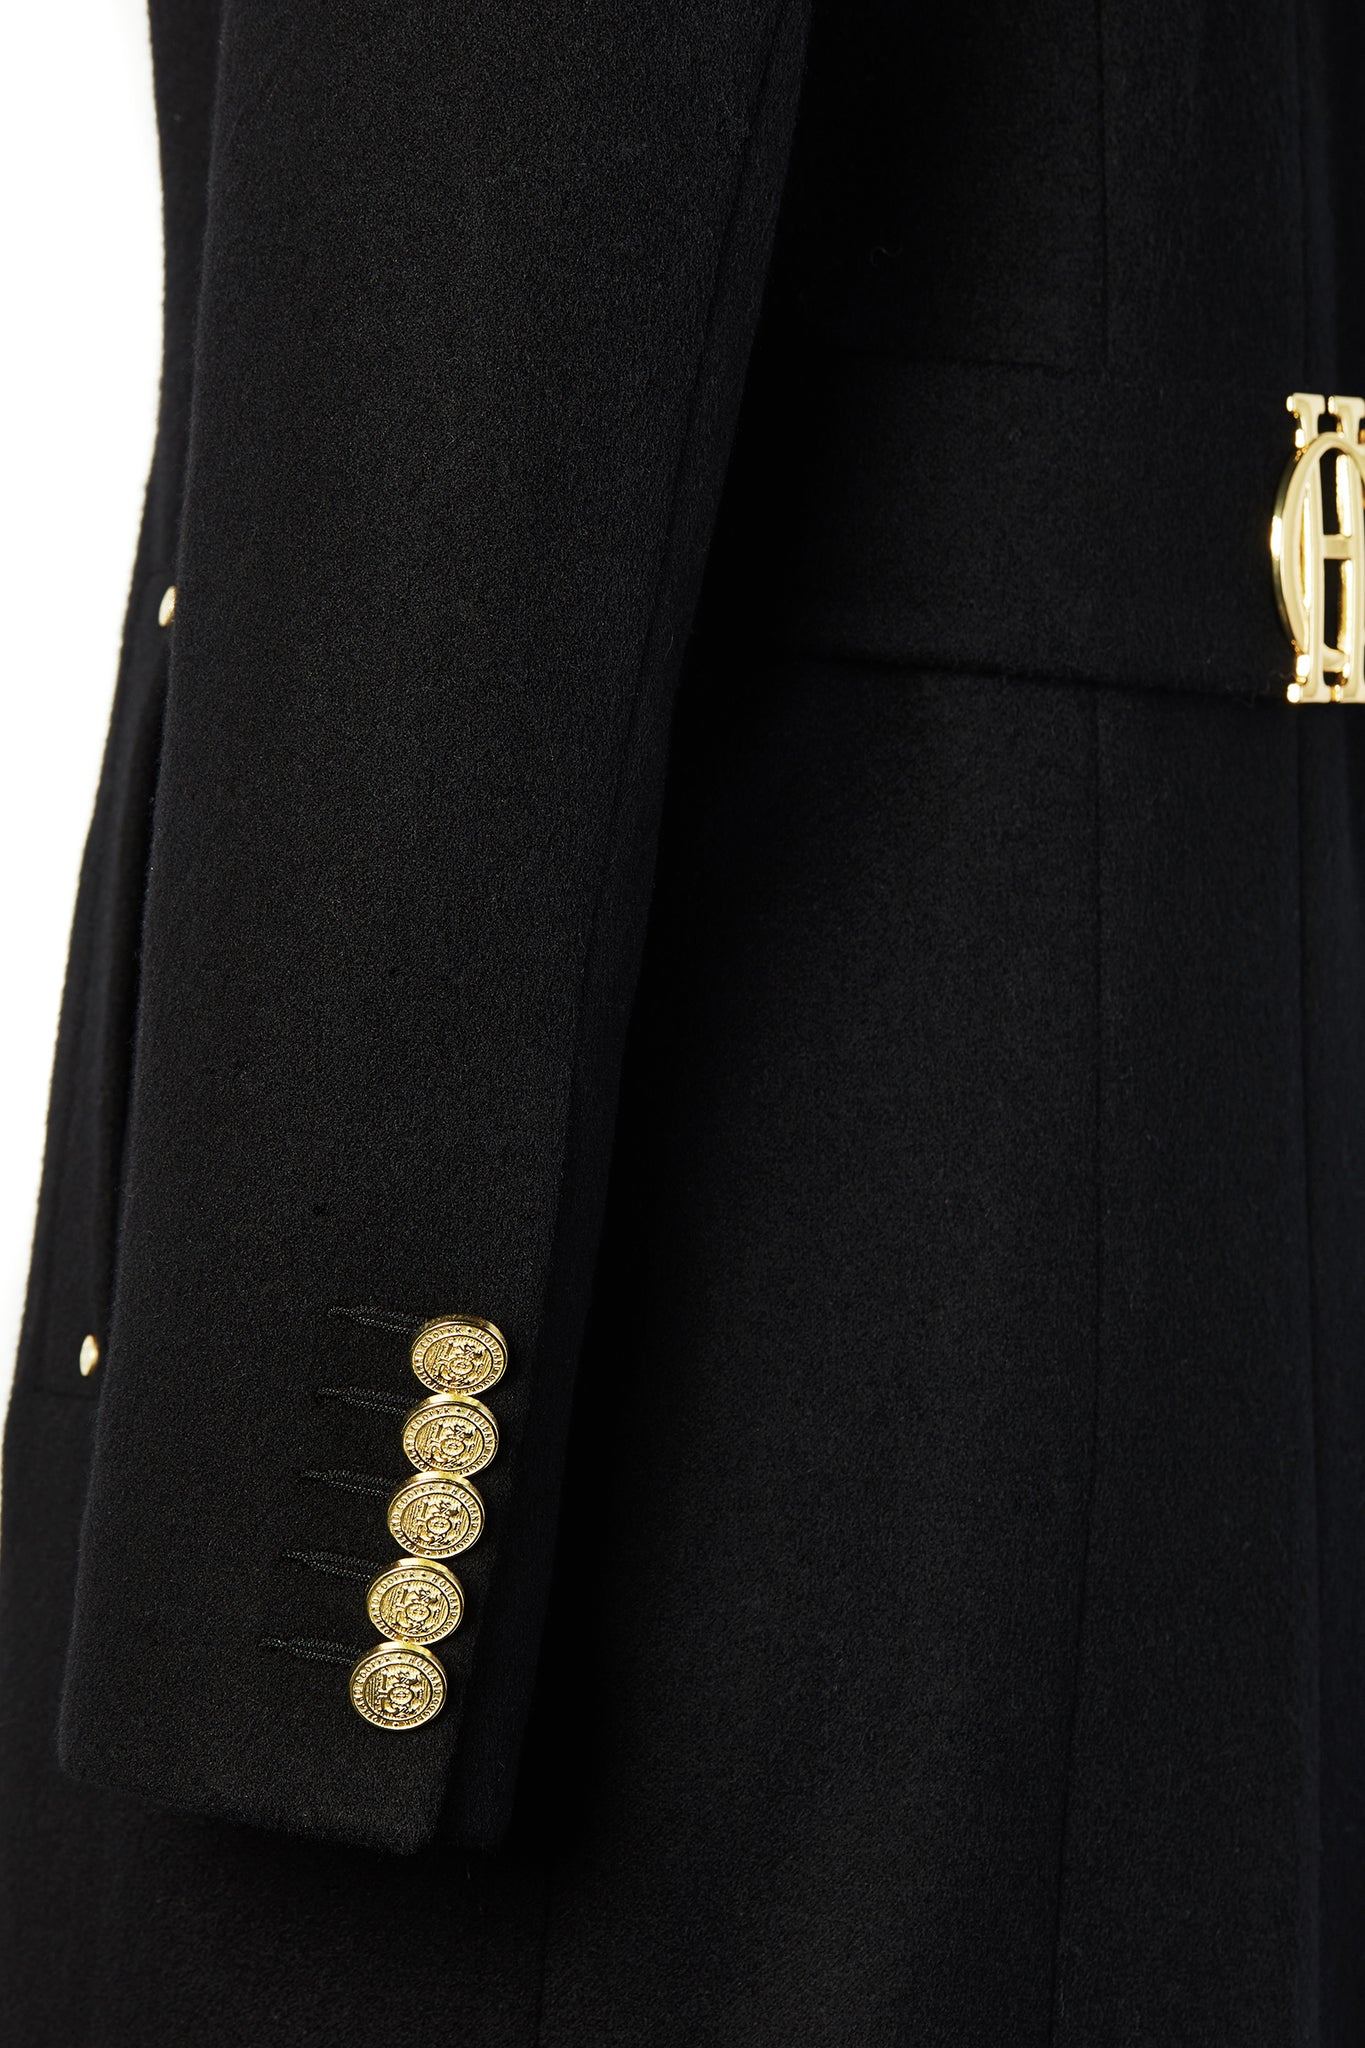 gold button sleeve detail on black single breasted full length wool coat